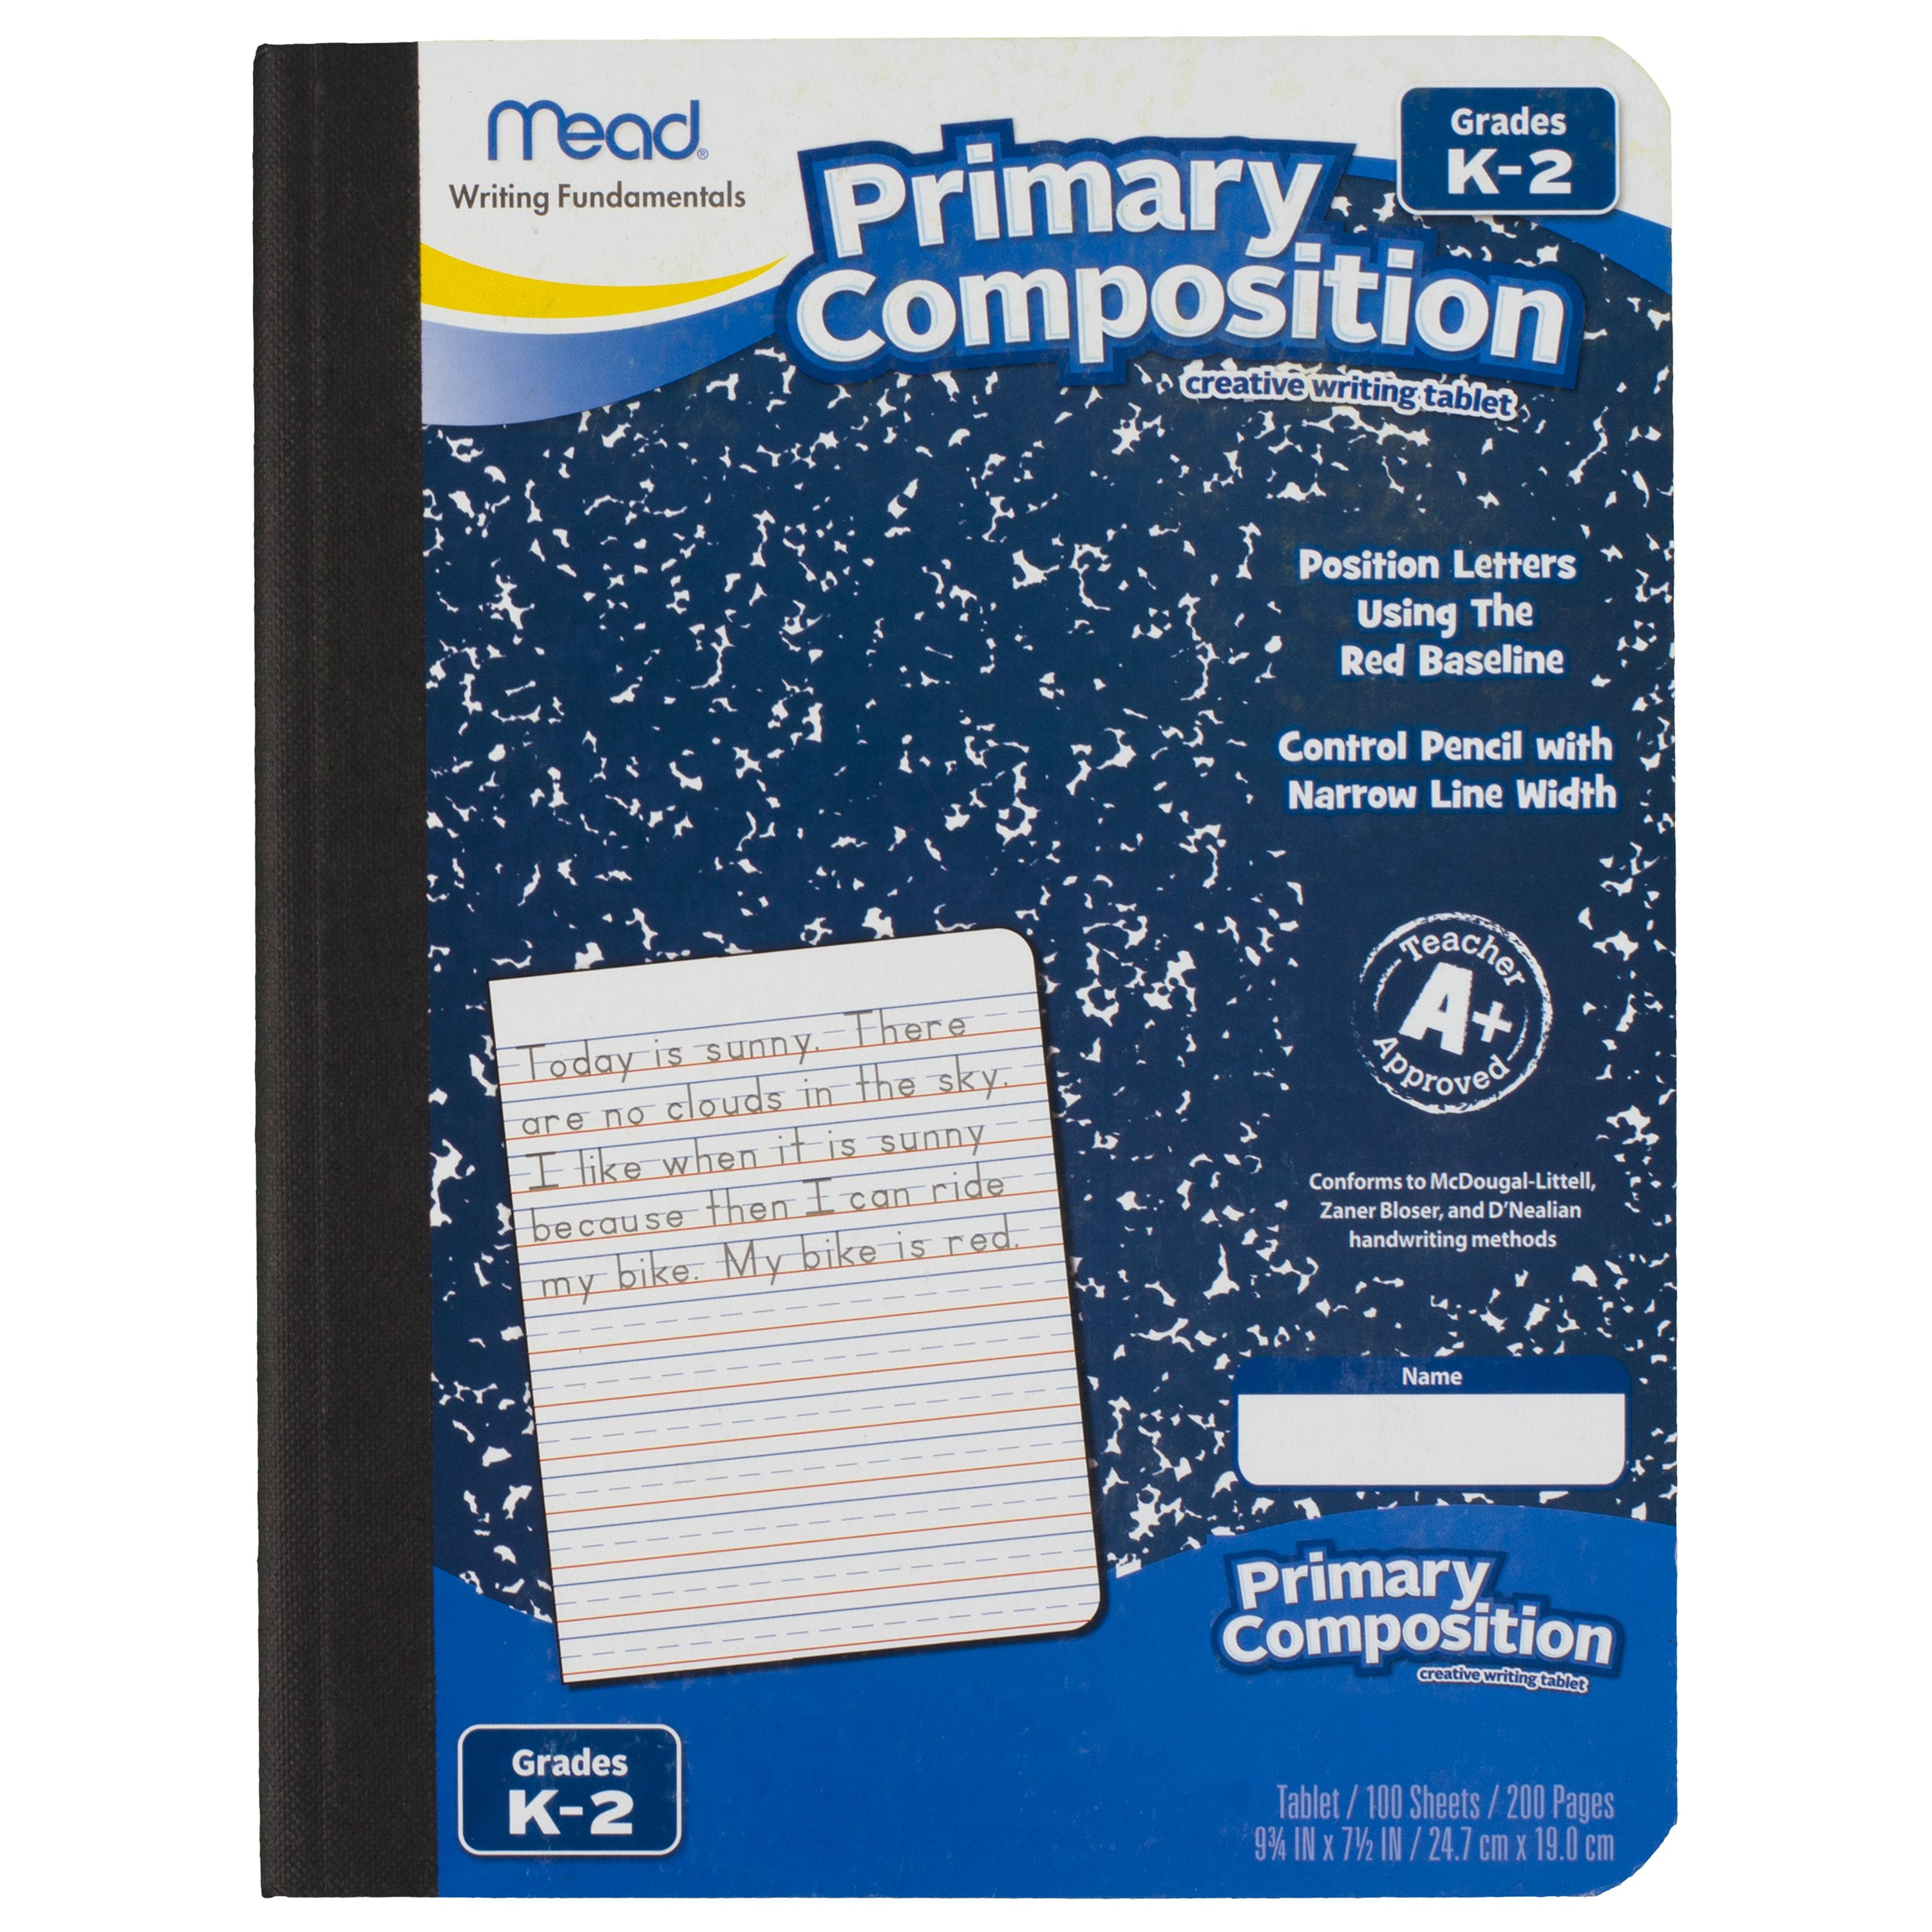 2-Primary Composition Book/Notebook,Grades K-2,Wide Ruled Paper,Draw,Write,Learn 